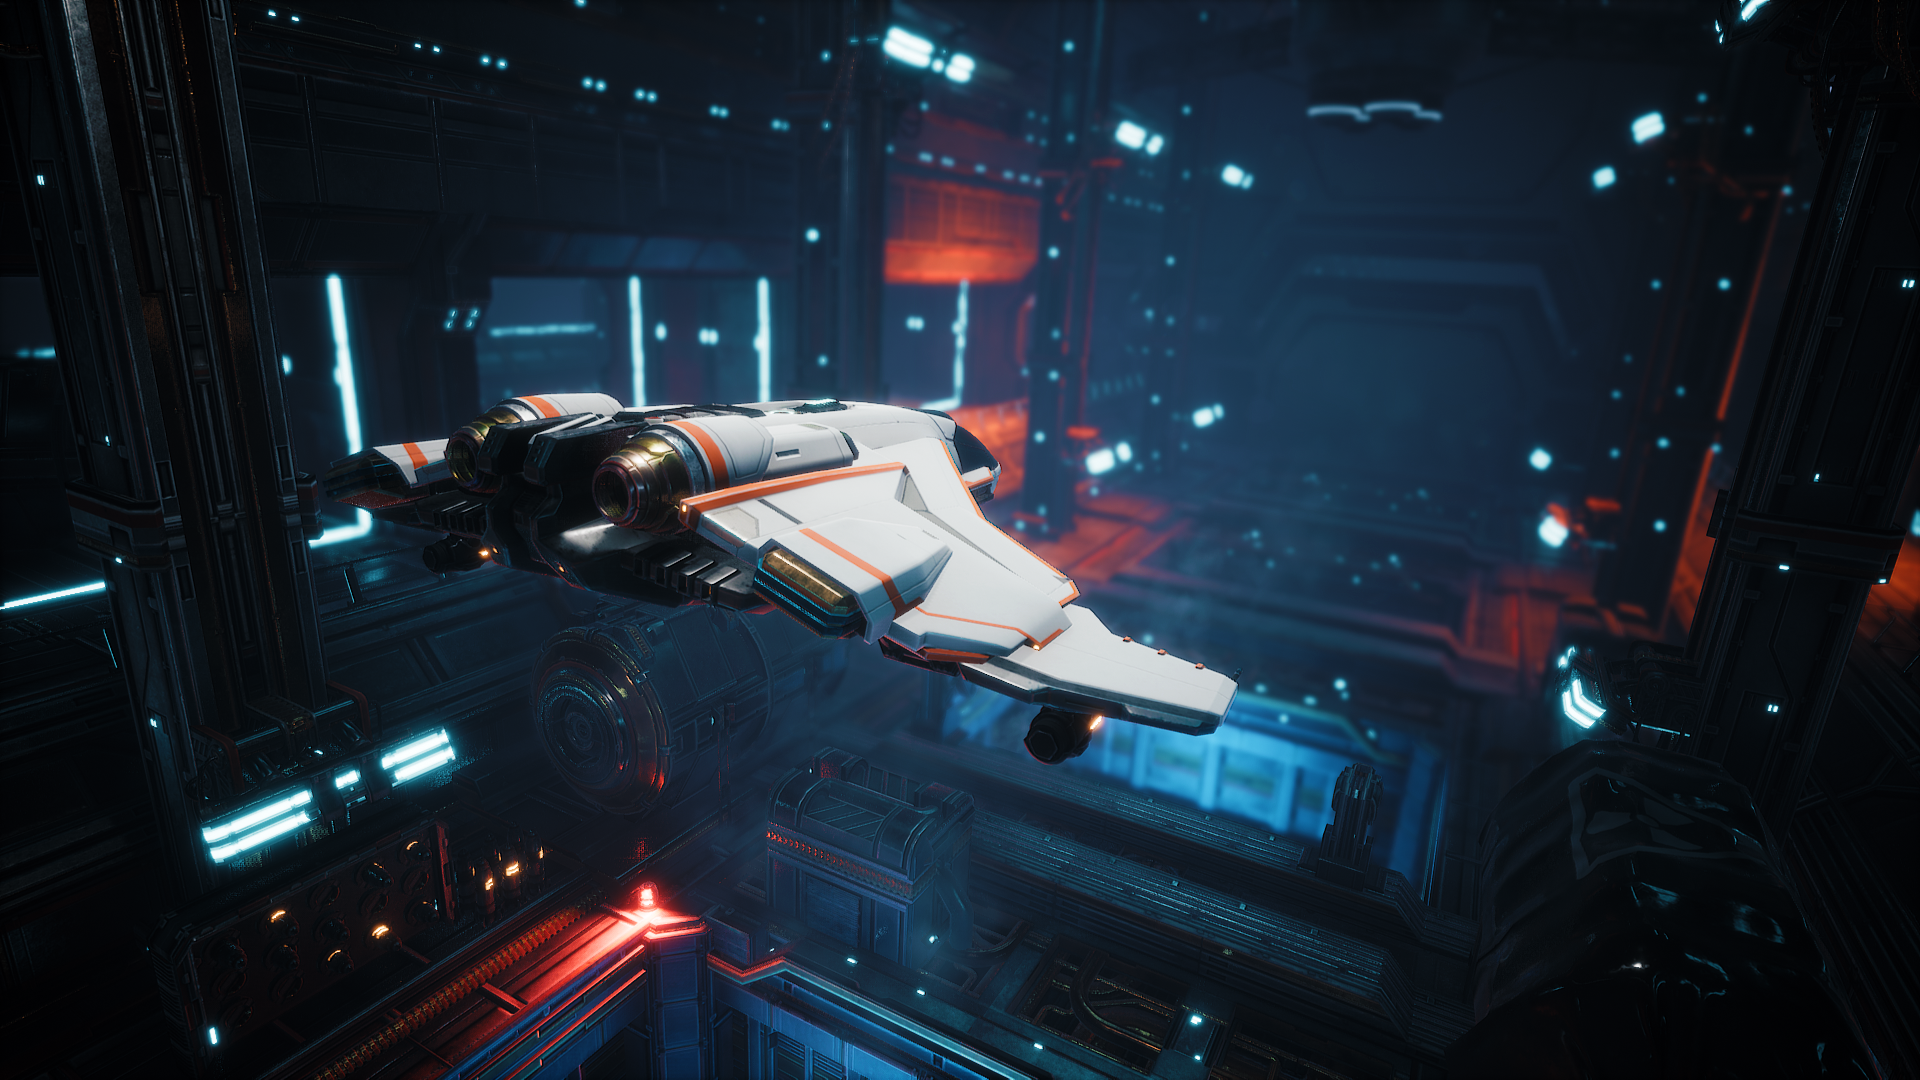 Video Game Everspace HD Wallpaper | Background Image